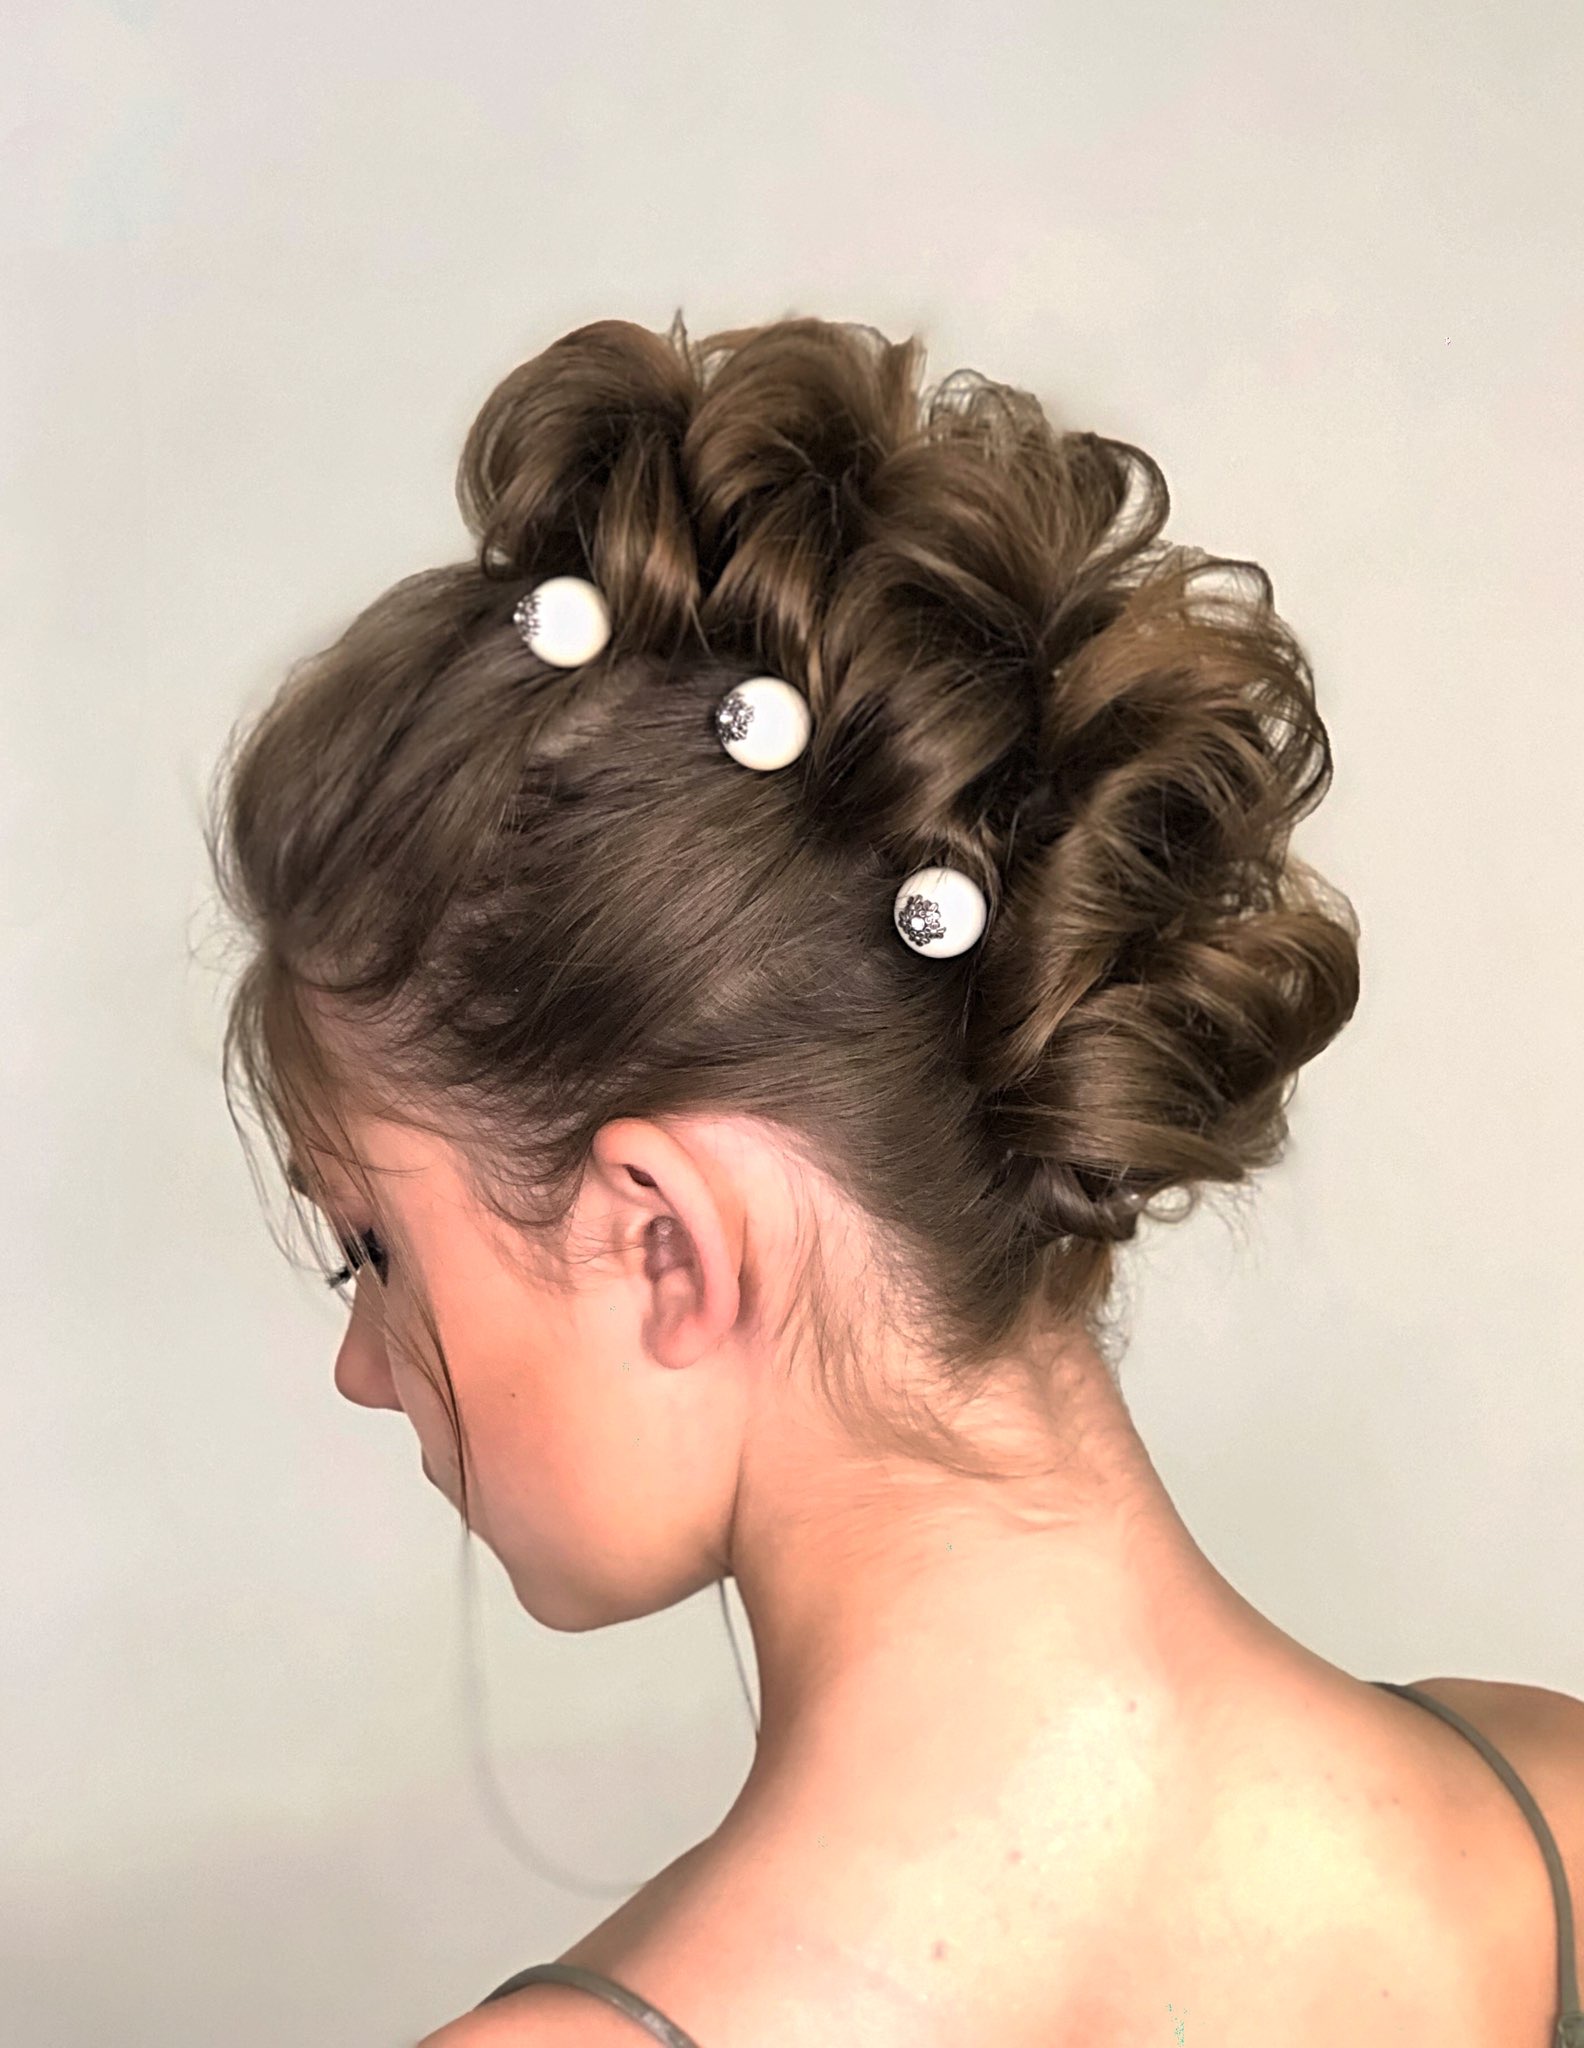 Express hairstyles<br><span color-type="color" style="color: #cfa569;">1500 kron</span>